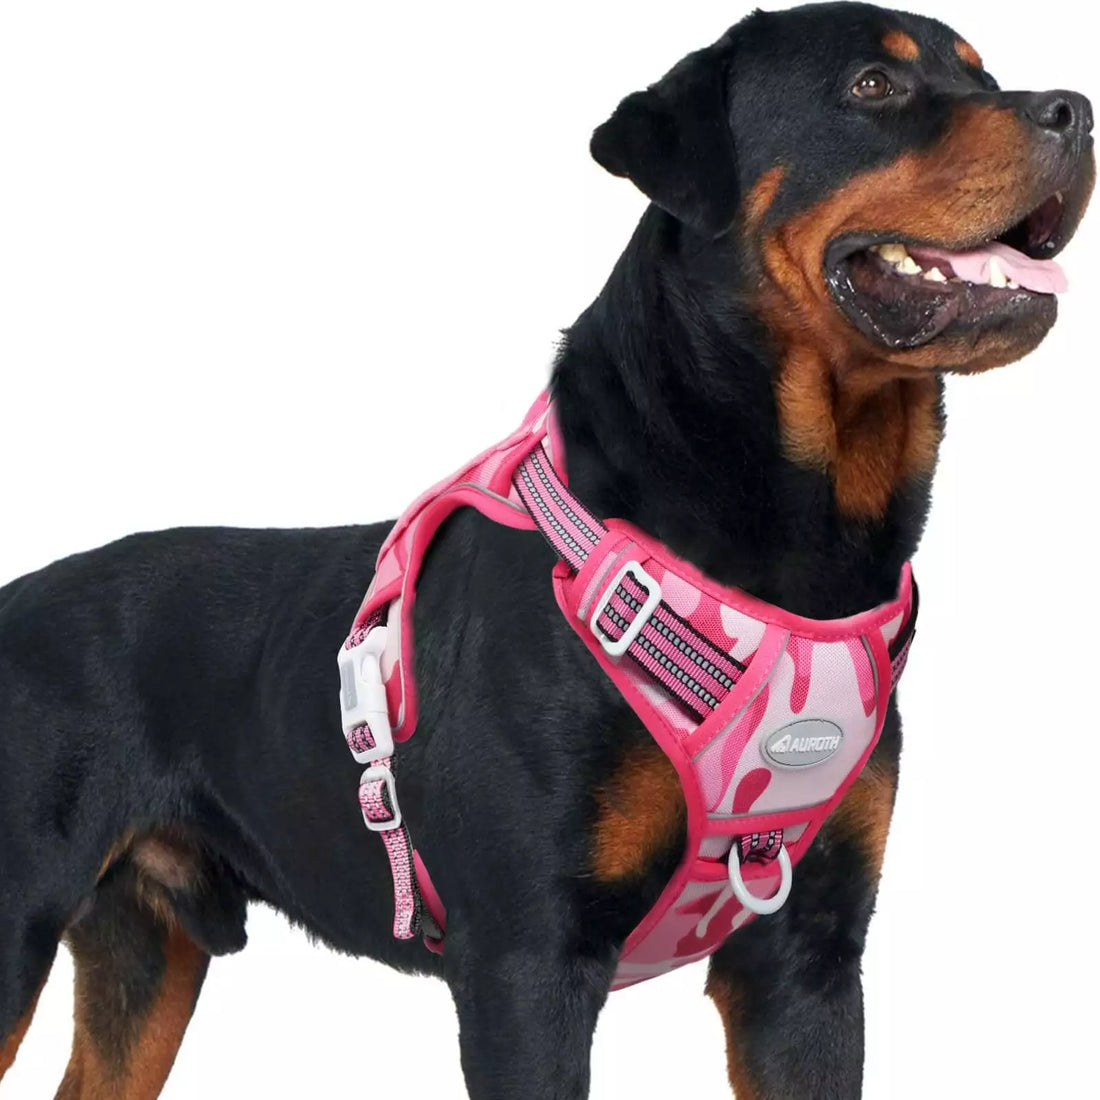 Auroth Tactical Dog Harness Adjustable Metal Buckles Dog Vest with Handle, No Pulling Front Leash Clip - Gray Camo